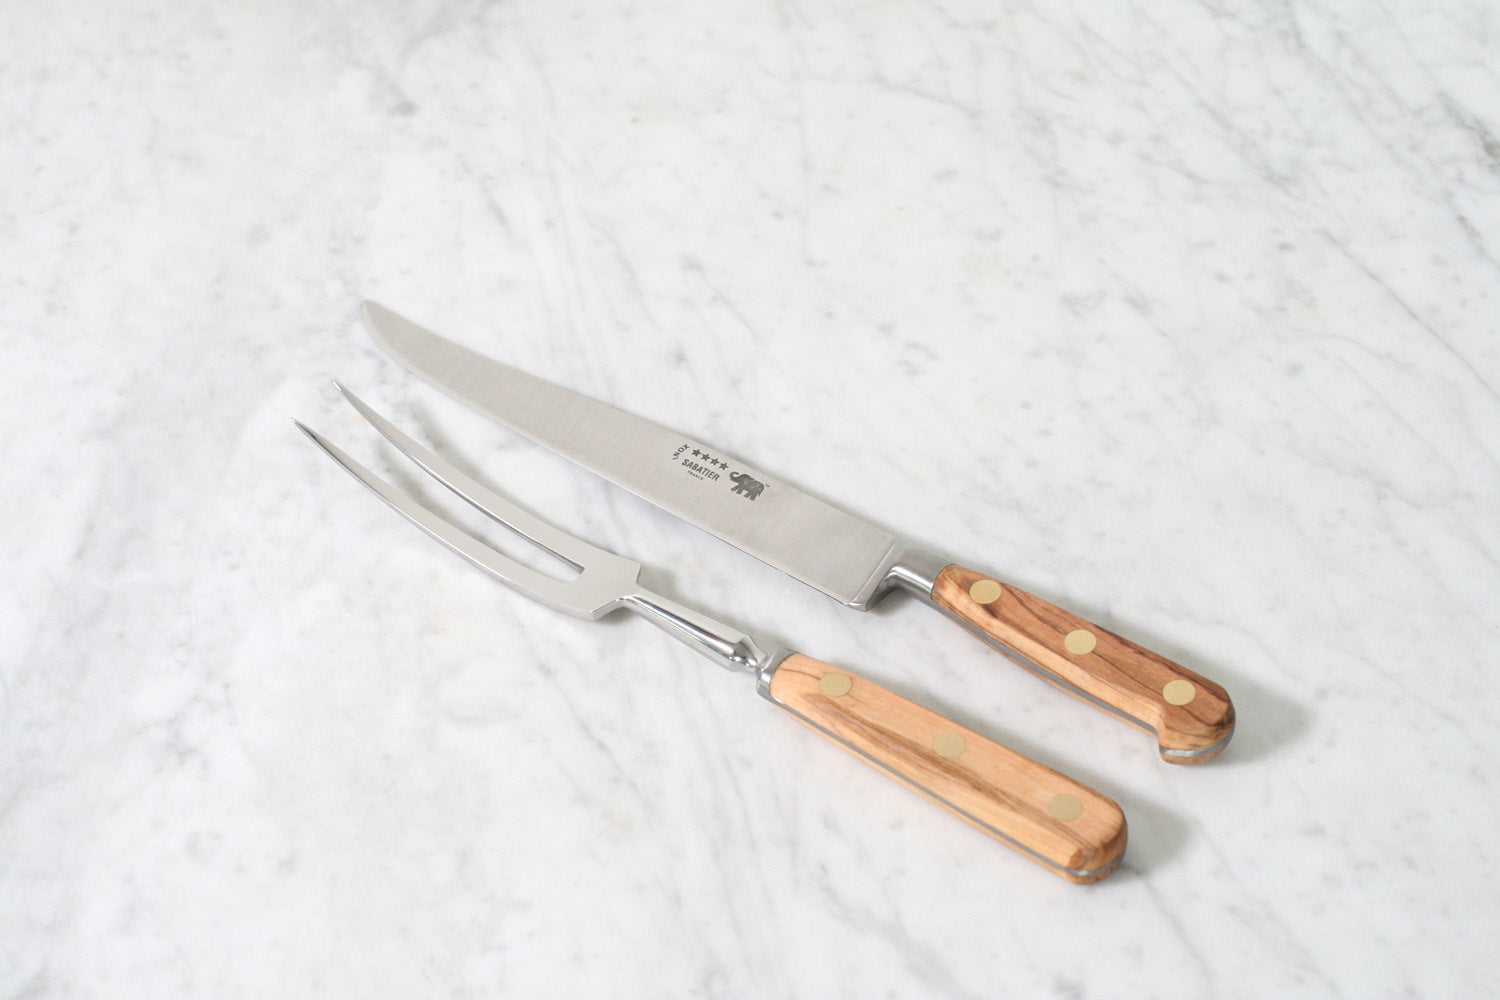 Sabatier 6 Chef's Knife Stainless Steel with Olivewood Handle — Flotsam +  Fork